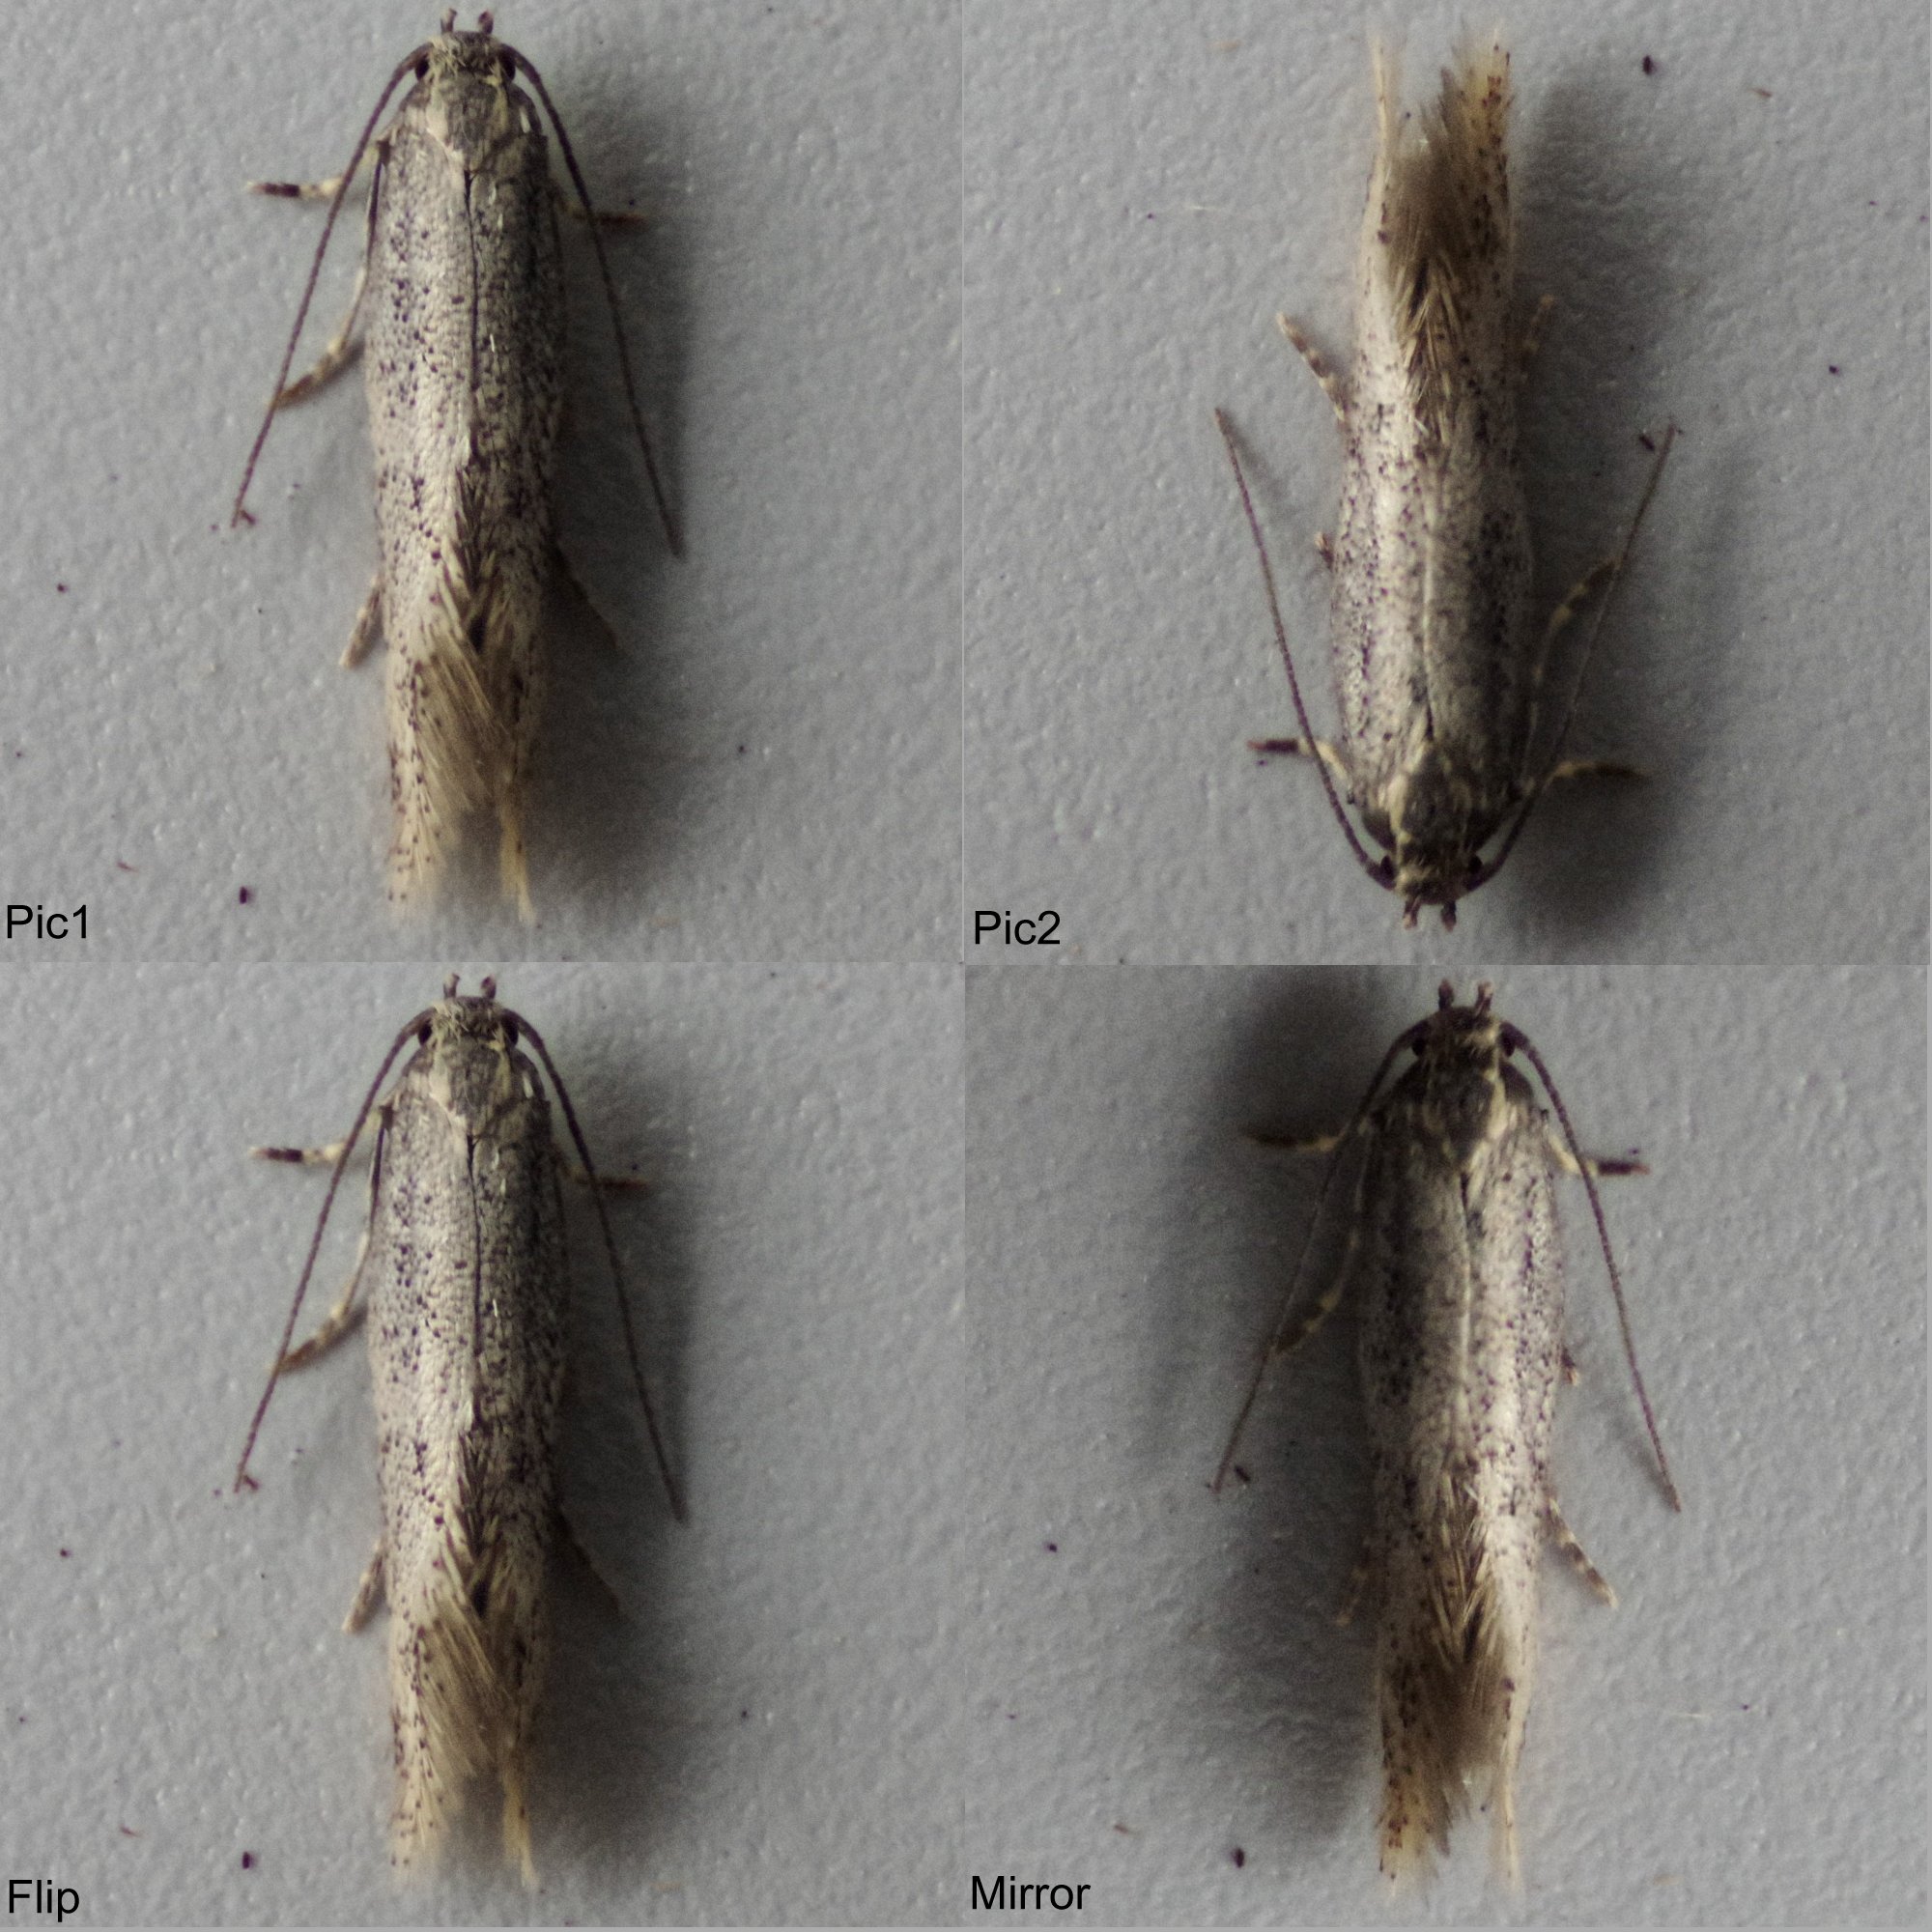 2x2 grid of top down images of a Little Dwarf moth showing the process I go through to remove shadows